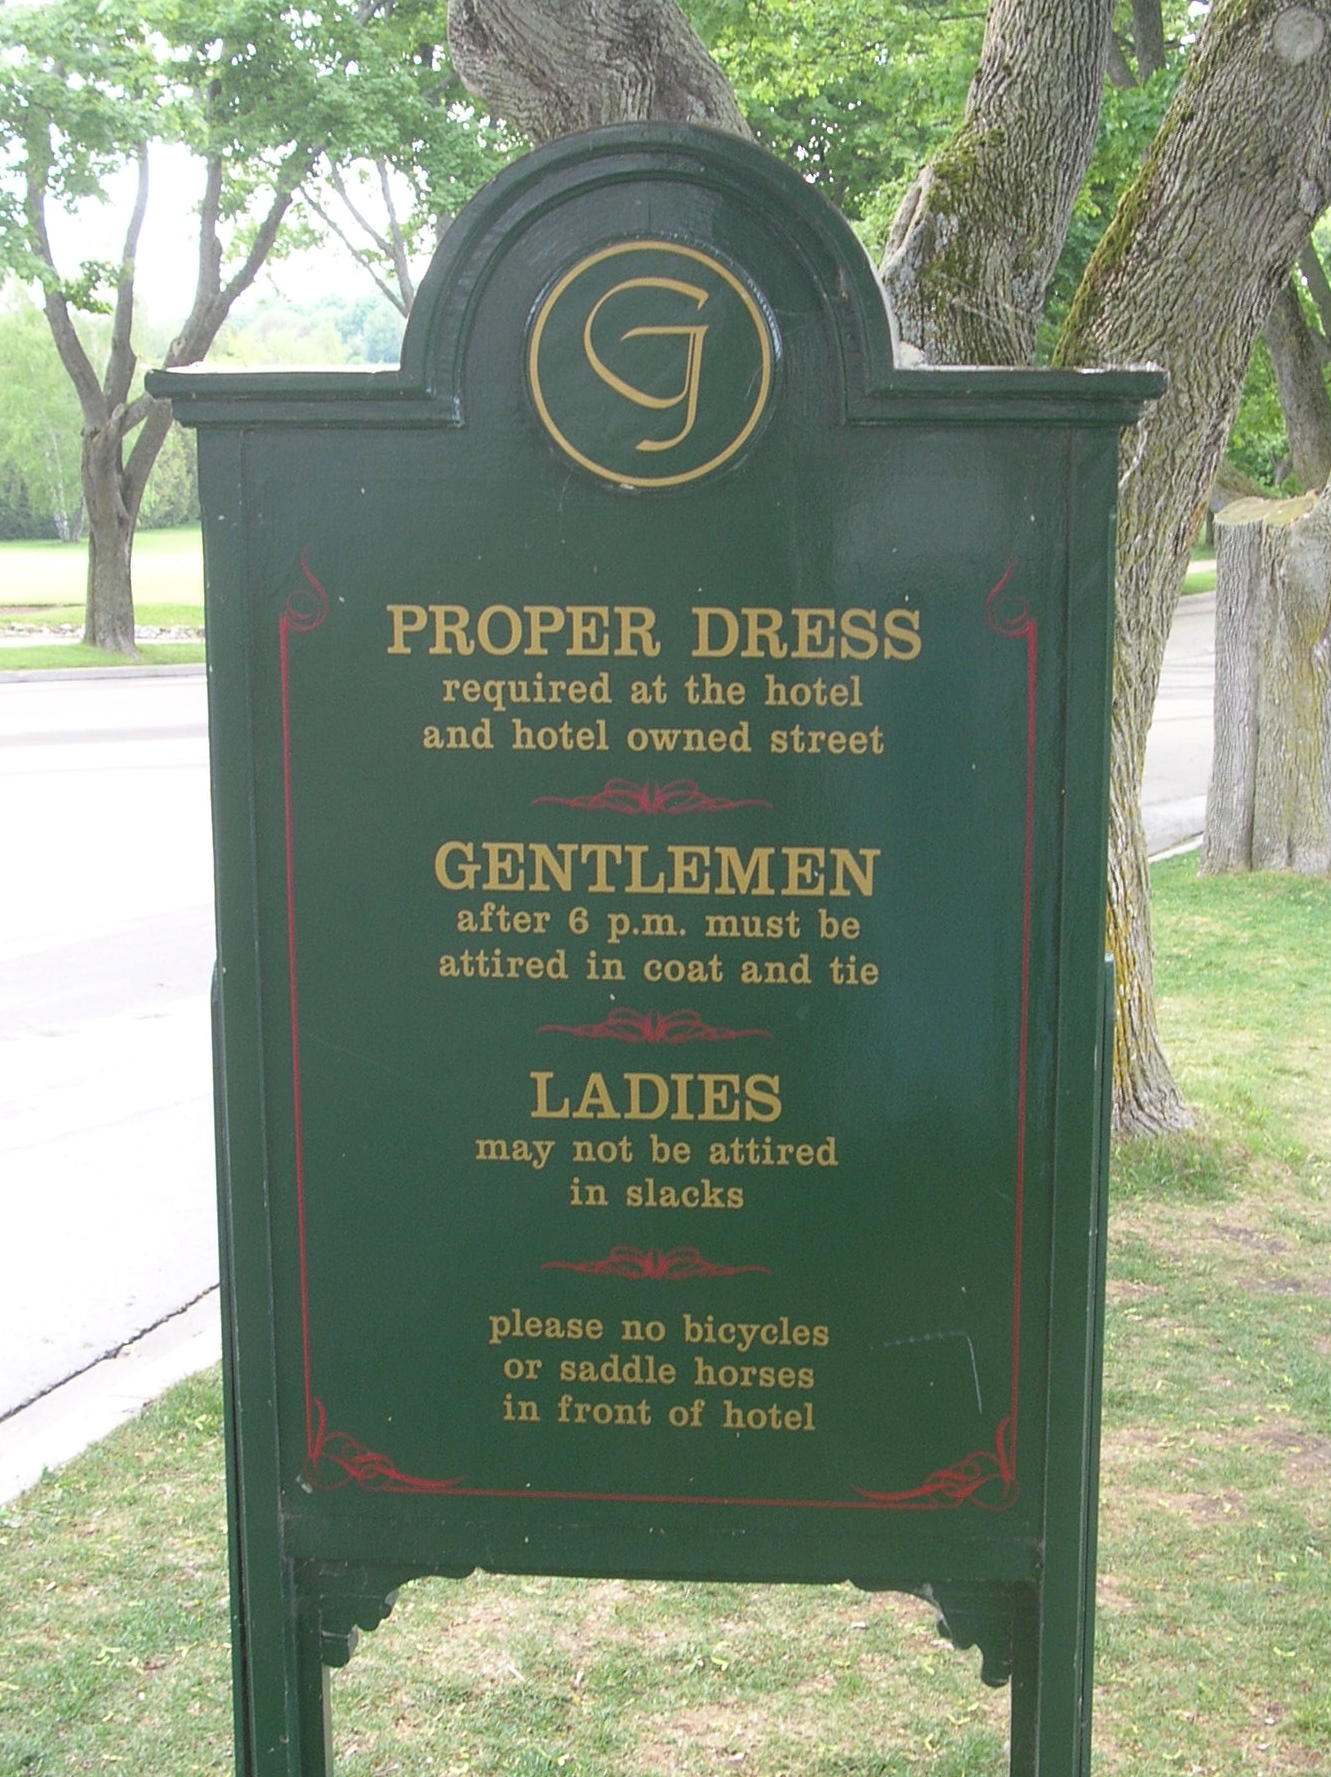 this sign is dedicated to proper dress and men's health, which was also given a coat of arms